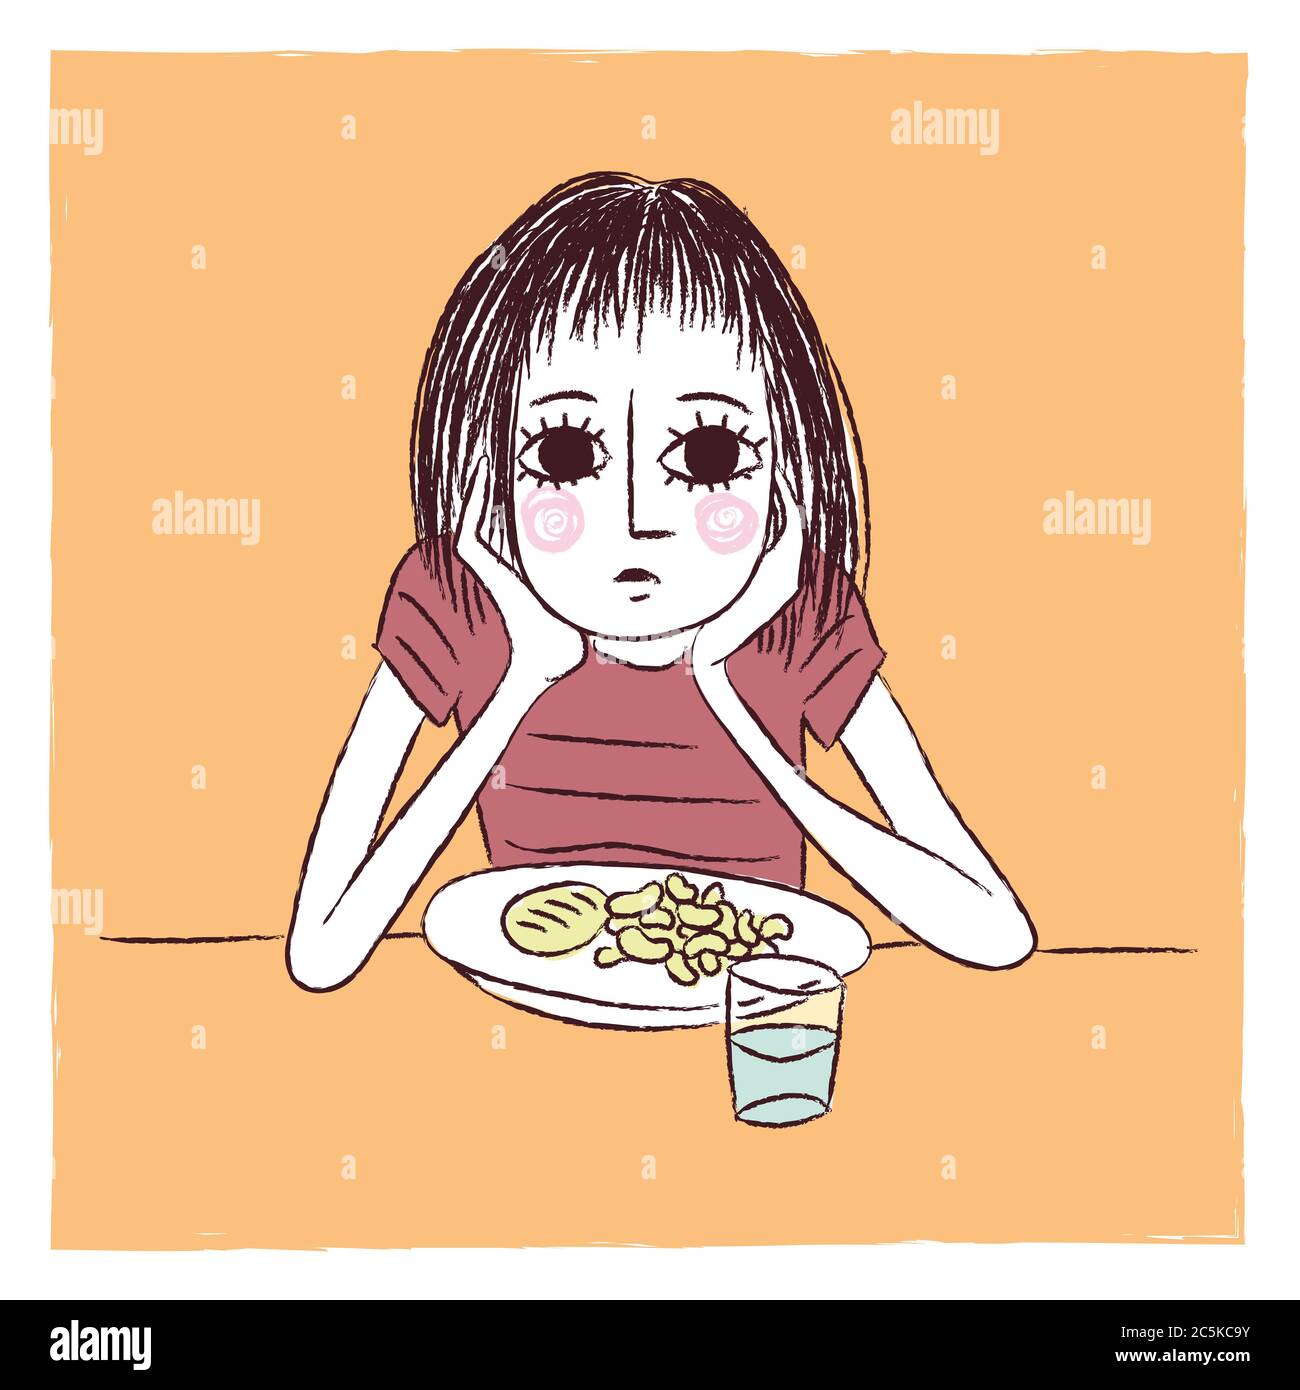 Illustration of a woman in front of her plate Stock Photo